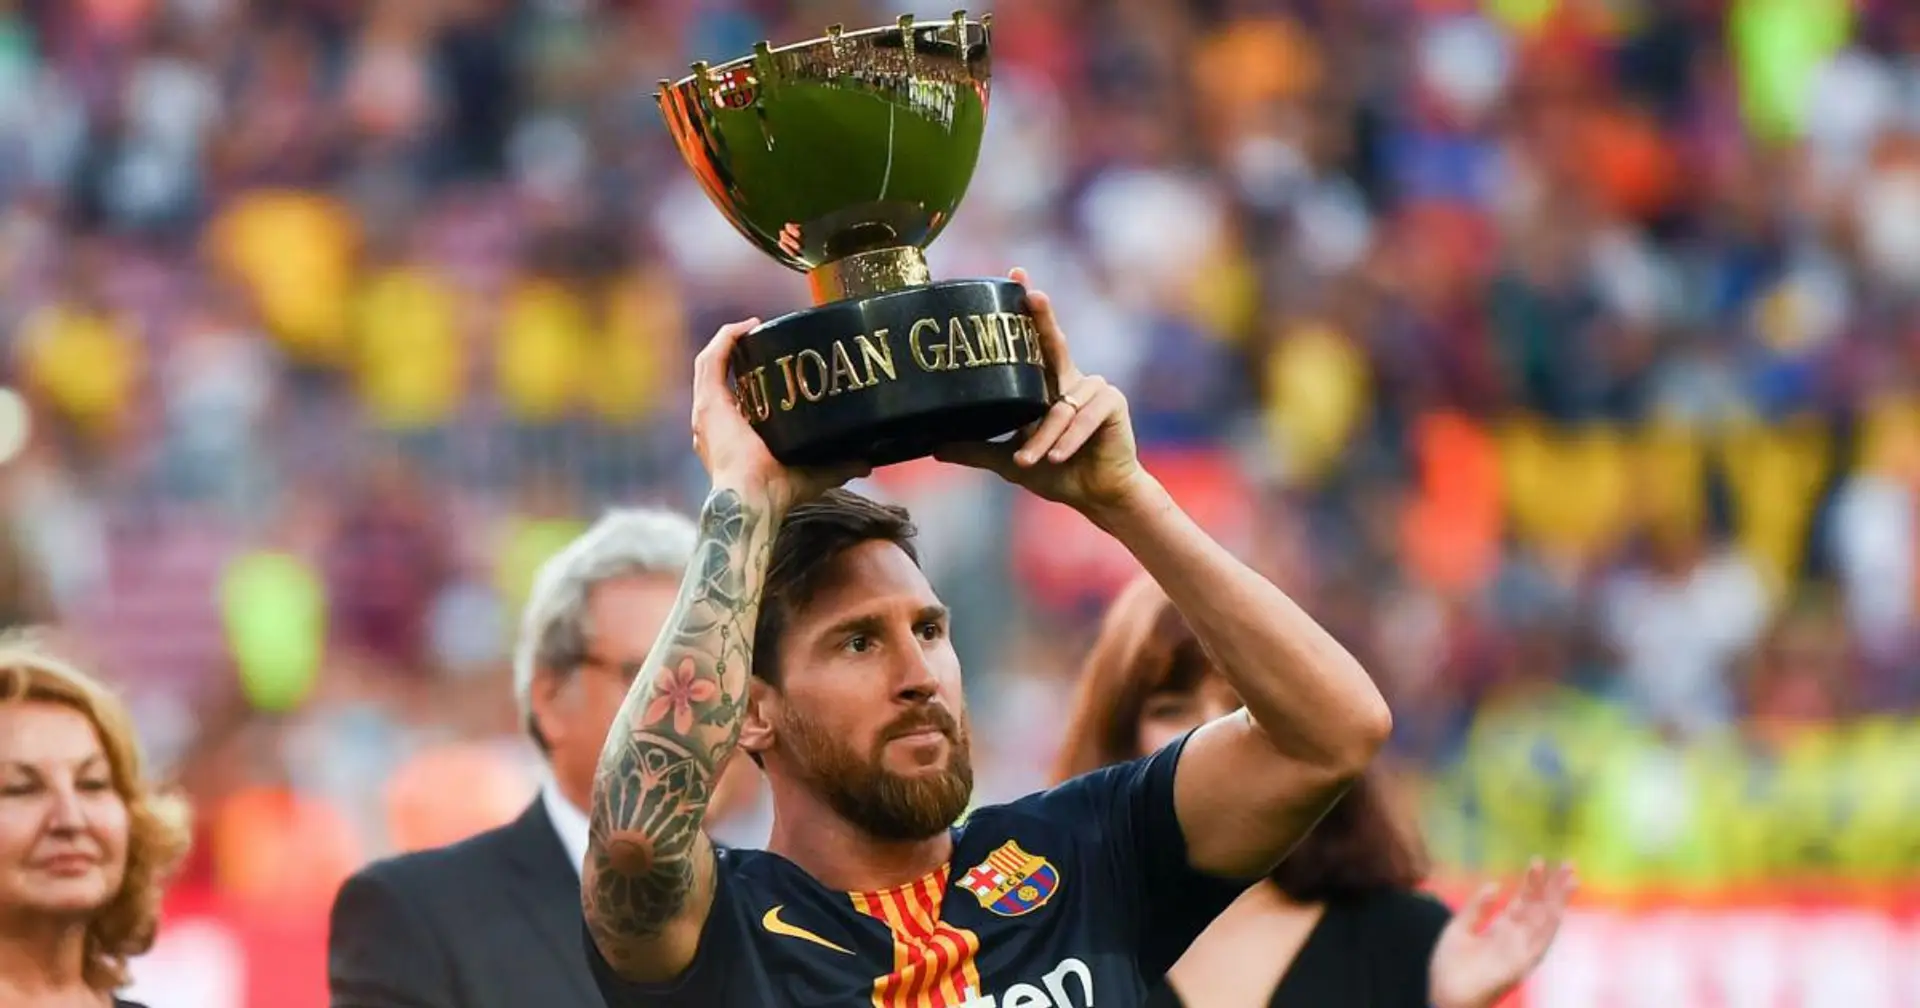 Barcelona 'invite' newly-promoted Elche to play Joan Gamper Trophy match